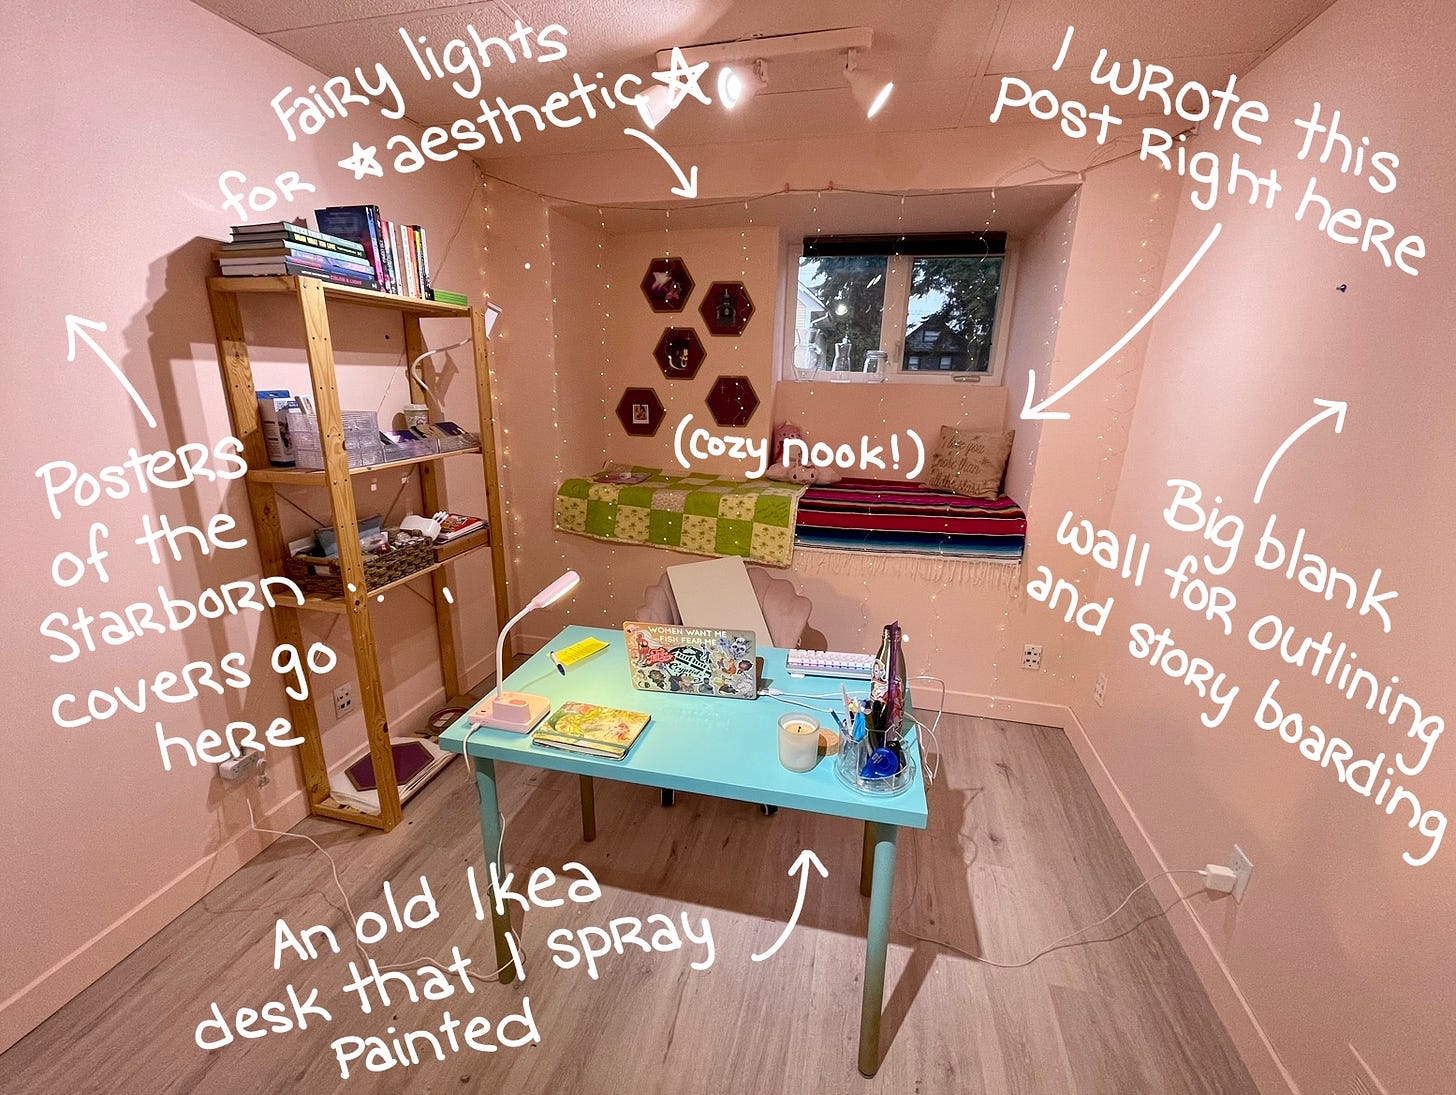 Image shows a room with pink walls. Wooden shelves sit against a wall, a teal desk sits in the middle of the floor, and a blanket-covered nook sits under a window at the back of the room. There is white writing on the image pointing out various features of the room.